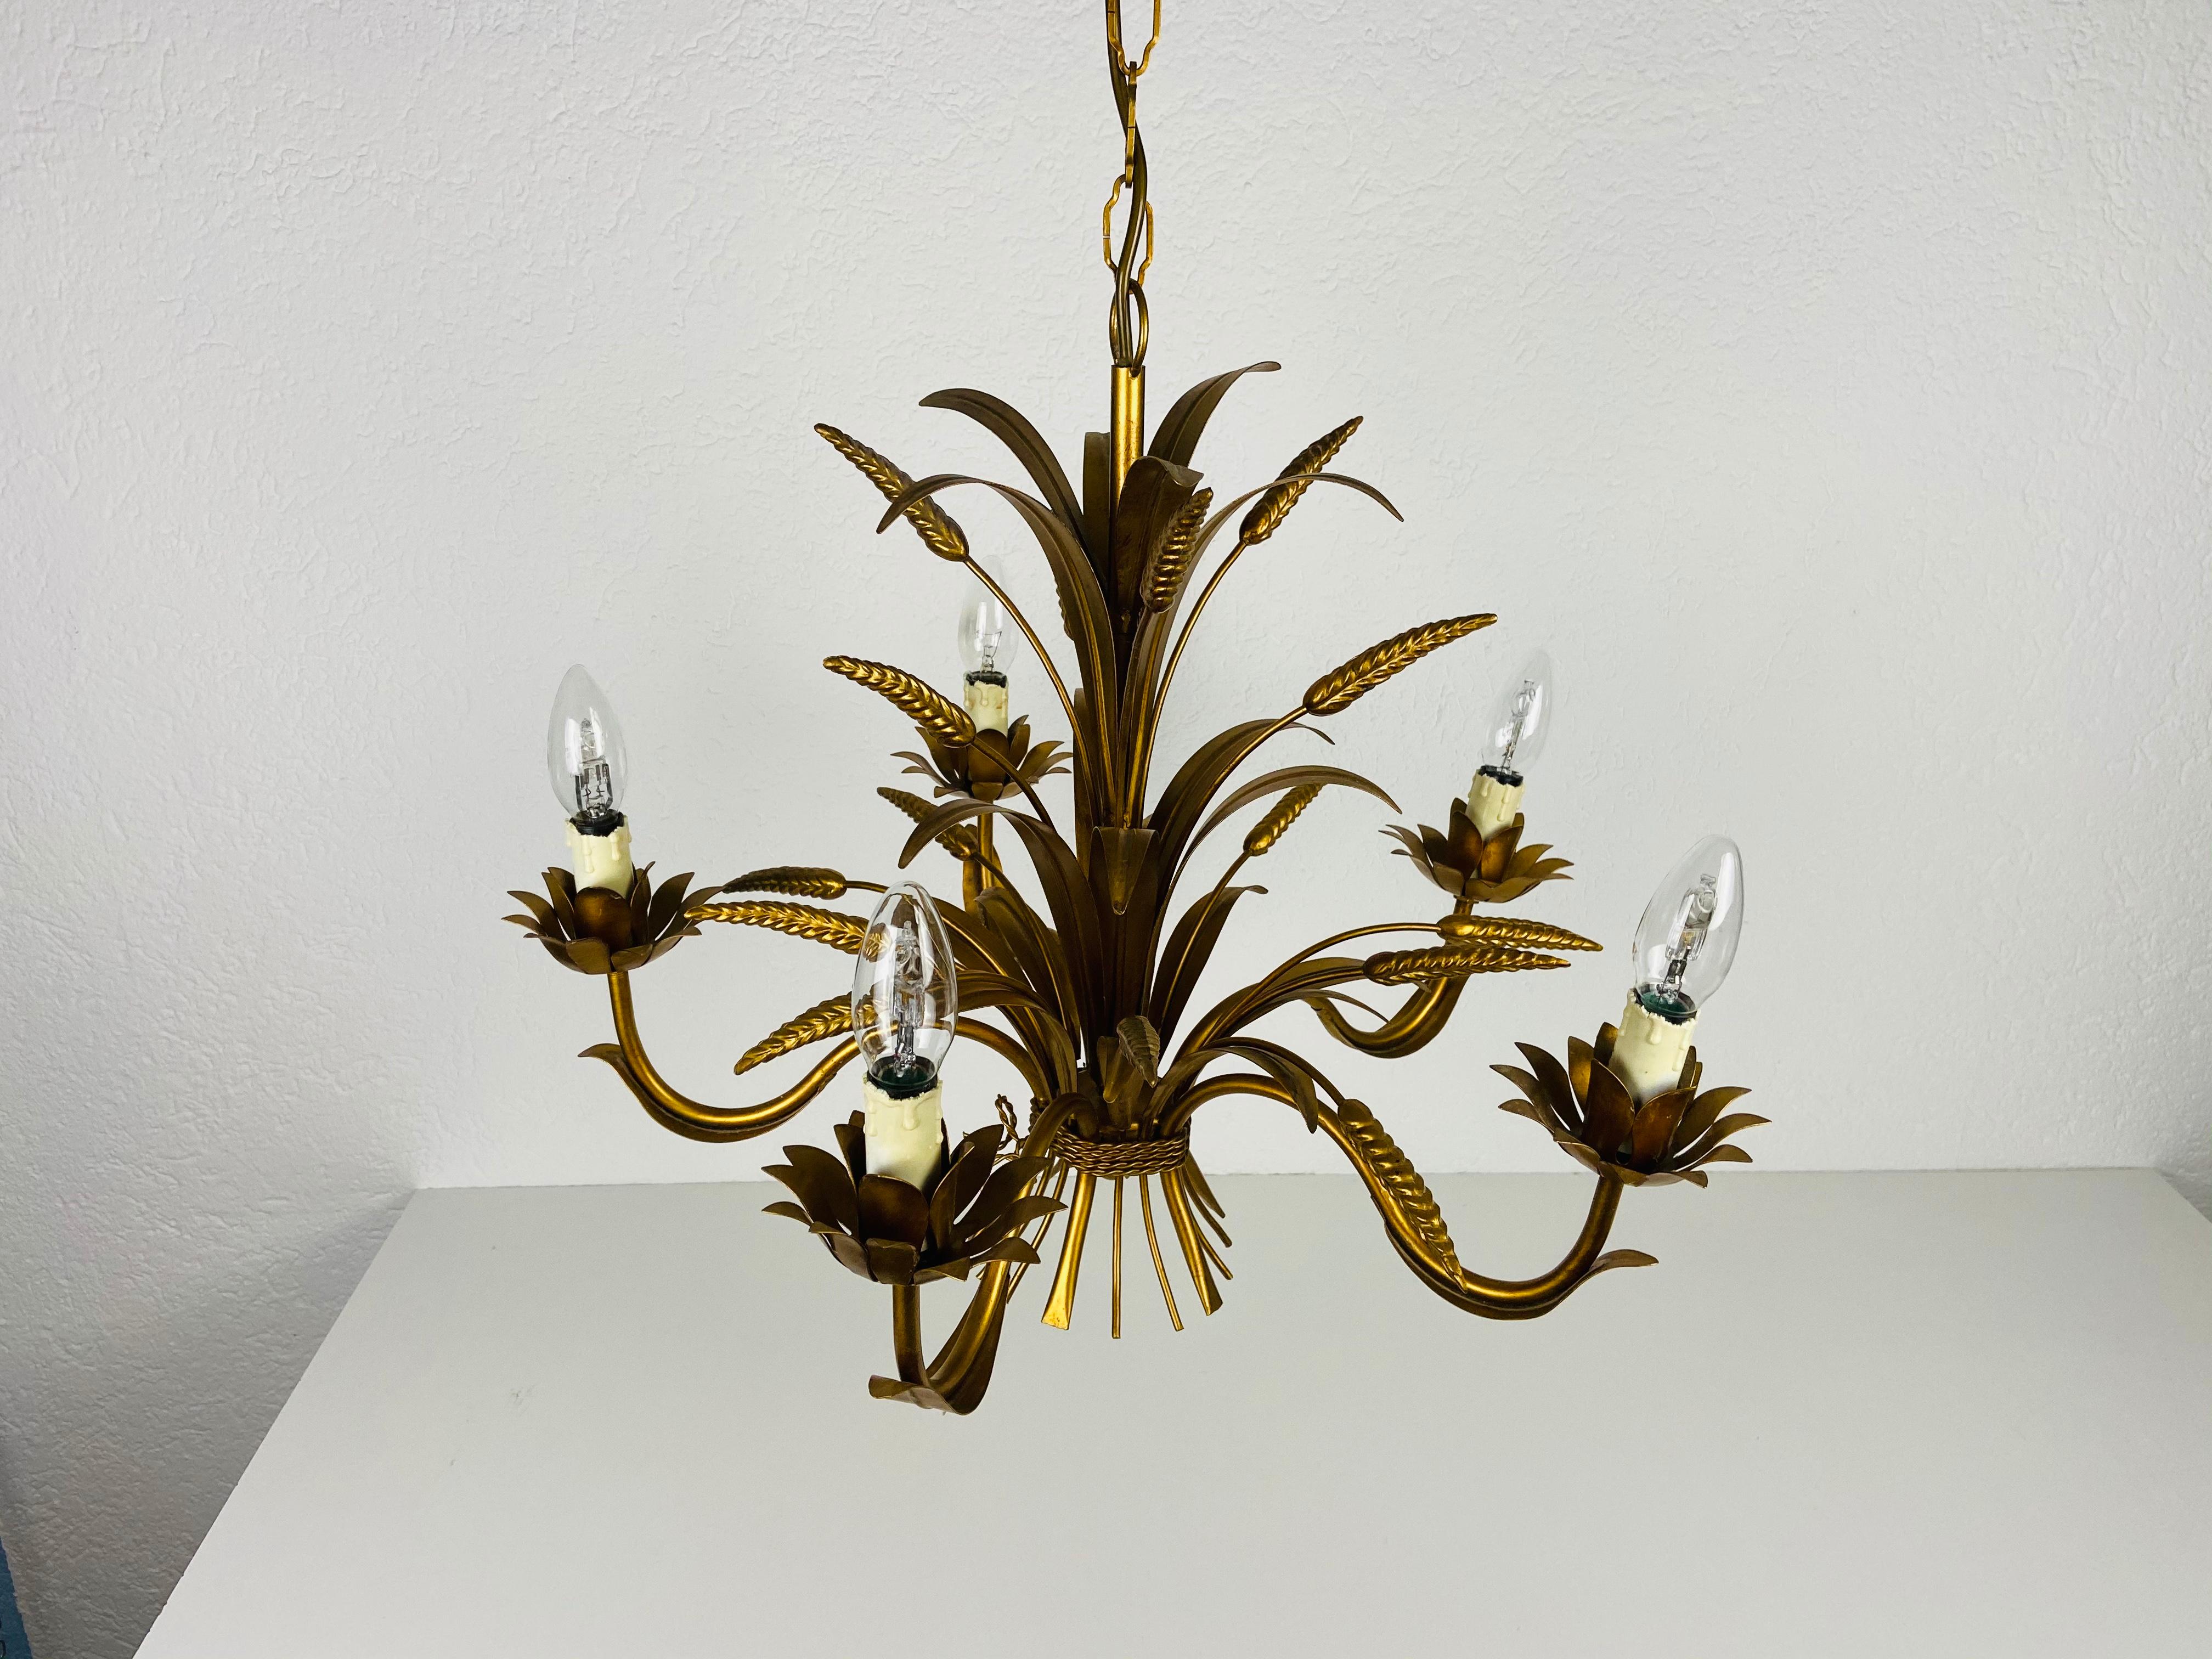 Hand-Crafted Golden Wheat Sheaf Pendant Lamp by Hans Kögl, Germany, 1970s